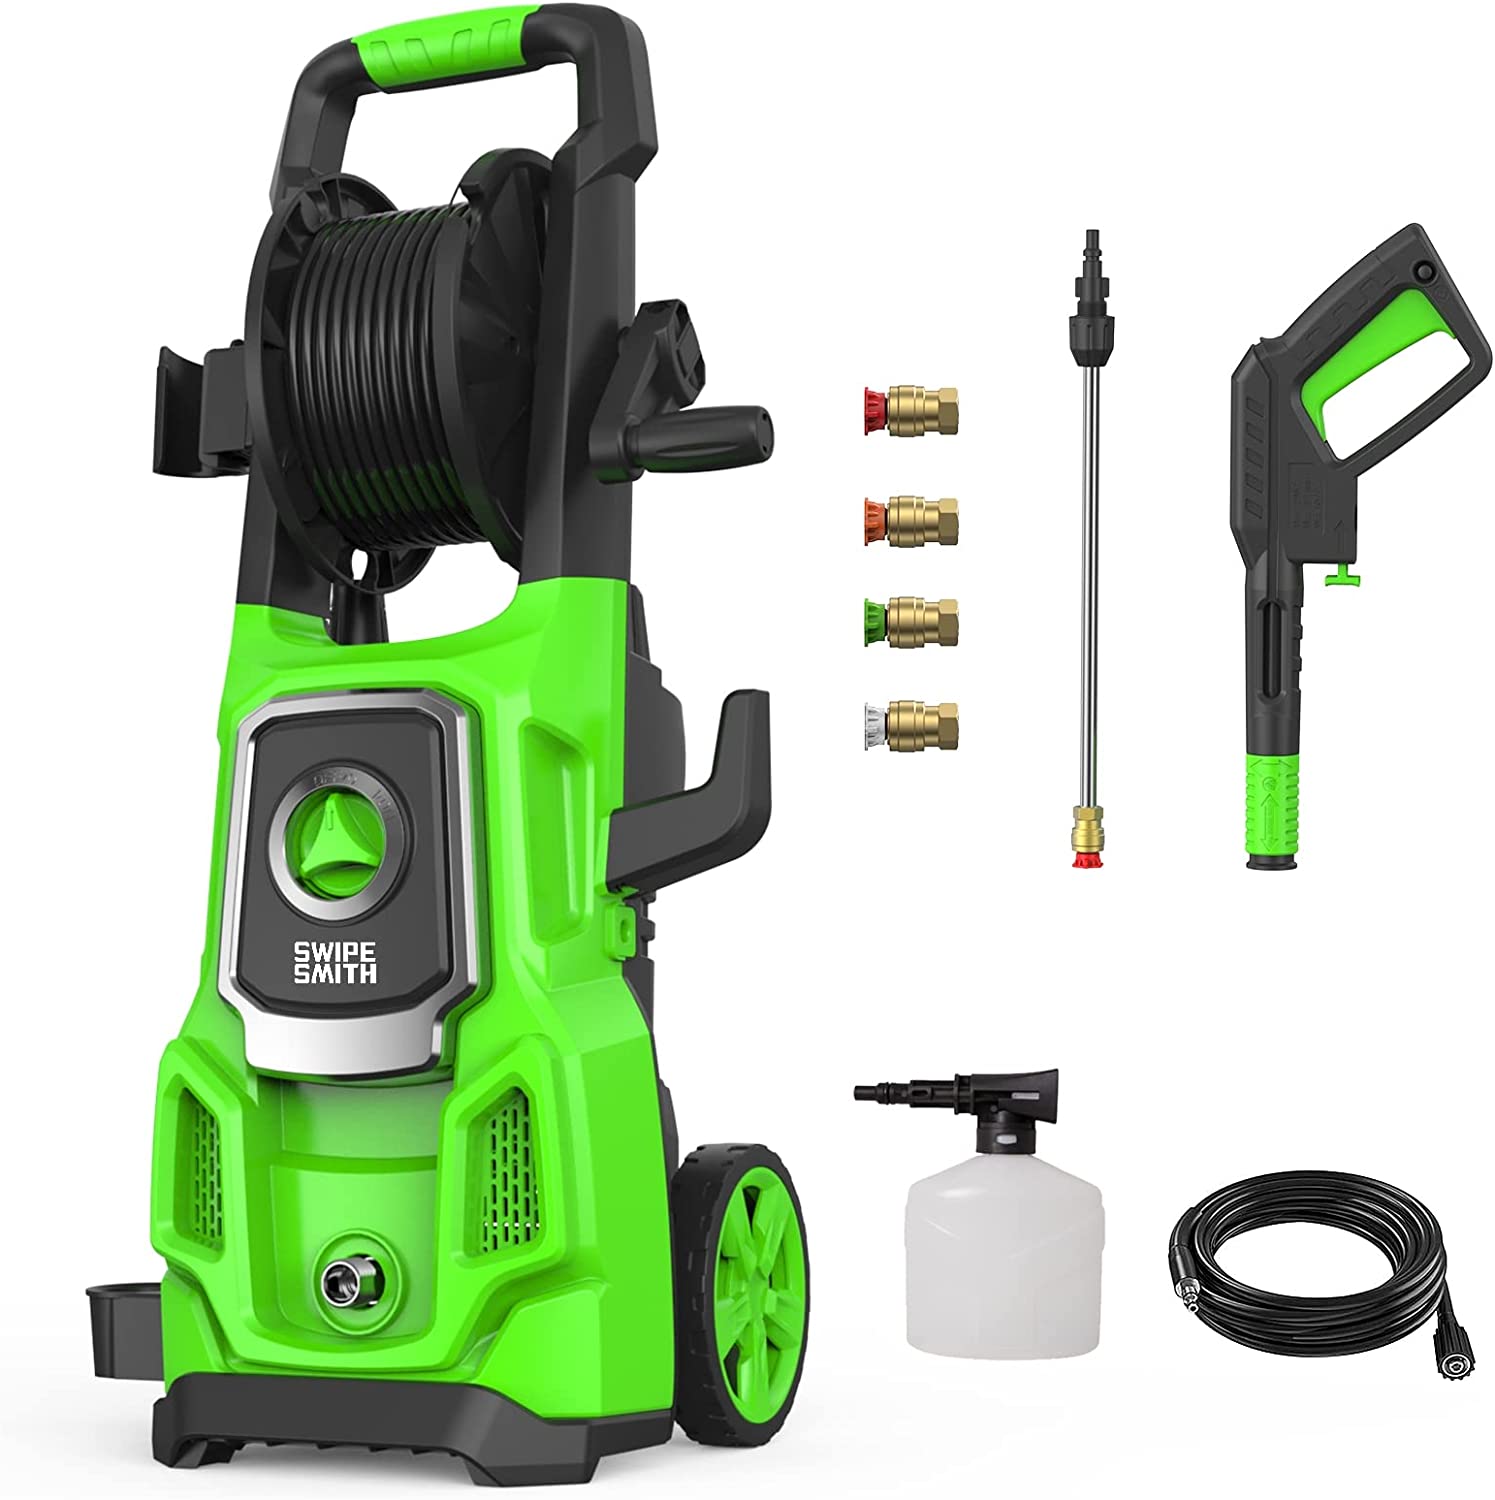 Electric Pressure Washer, SWIPESMITH 3000 Max PSI, 2.6 GPM Power Washer Machine with Hose Reel, 4 Quick-Connect Nozzles, Foam Cannon for CarPatioDriveways Cleaning